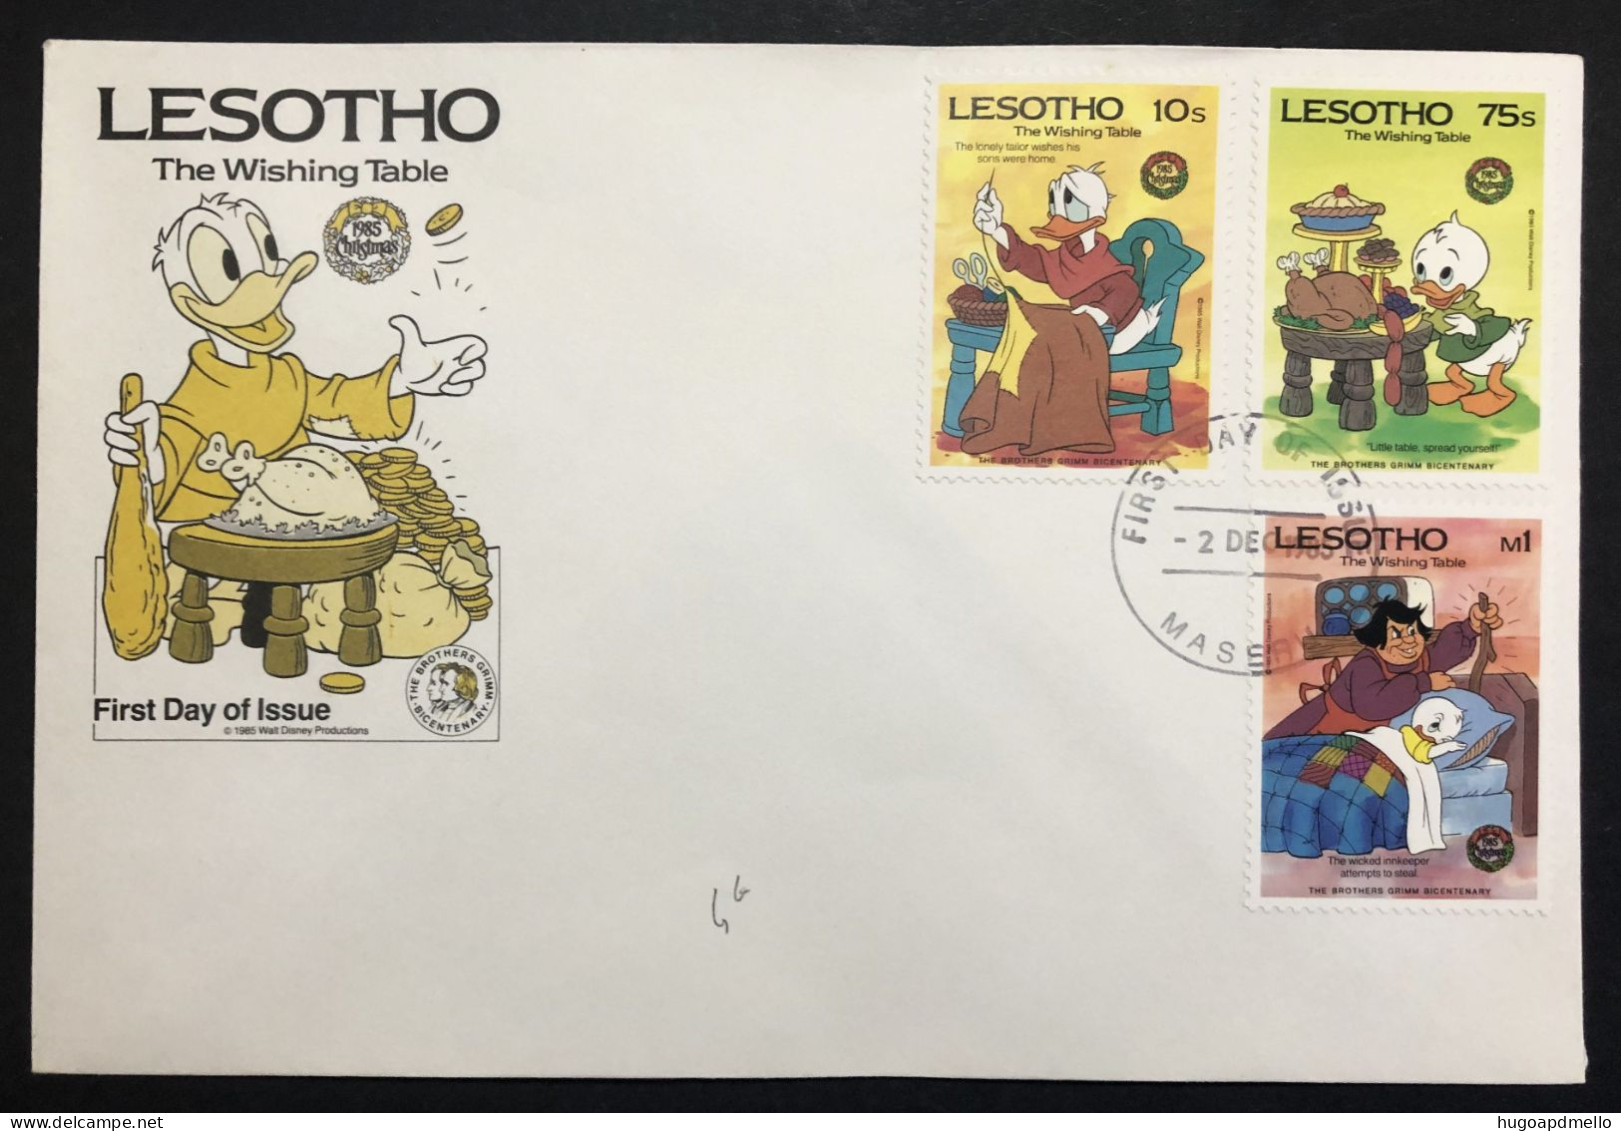 LESOTHO, Uncirculated FDC, « DISNEY », « THE WISHING TABLE », 1985 - Bandes Dessinées